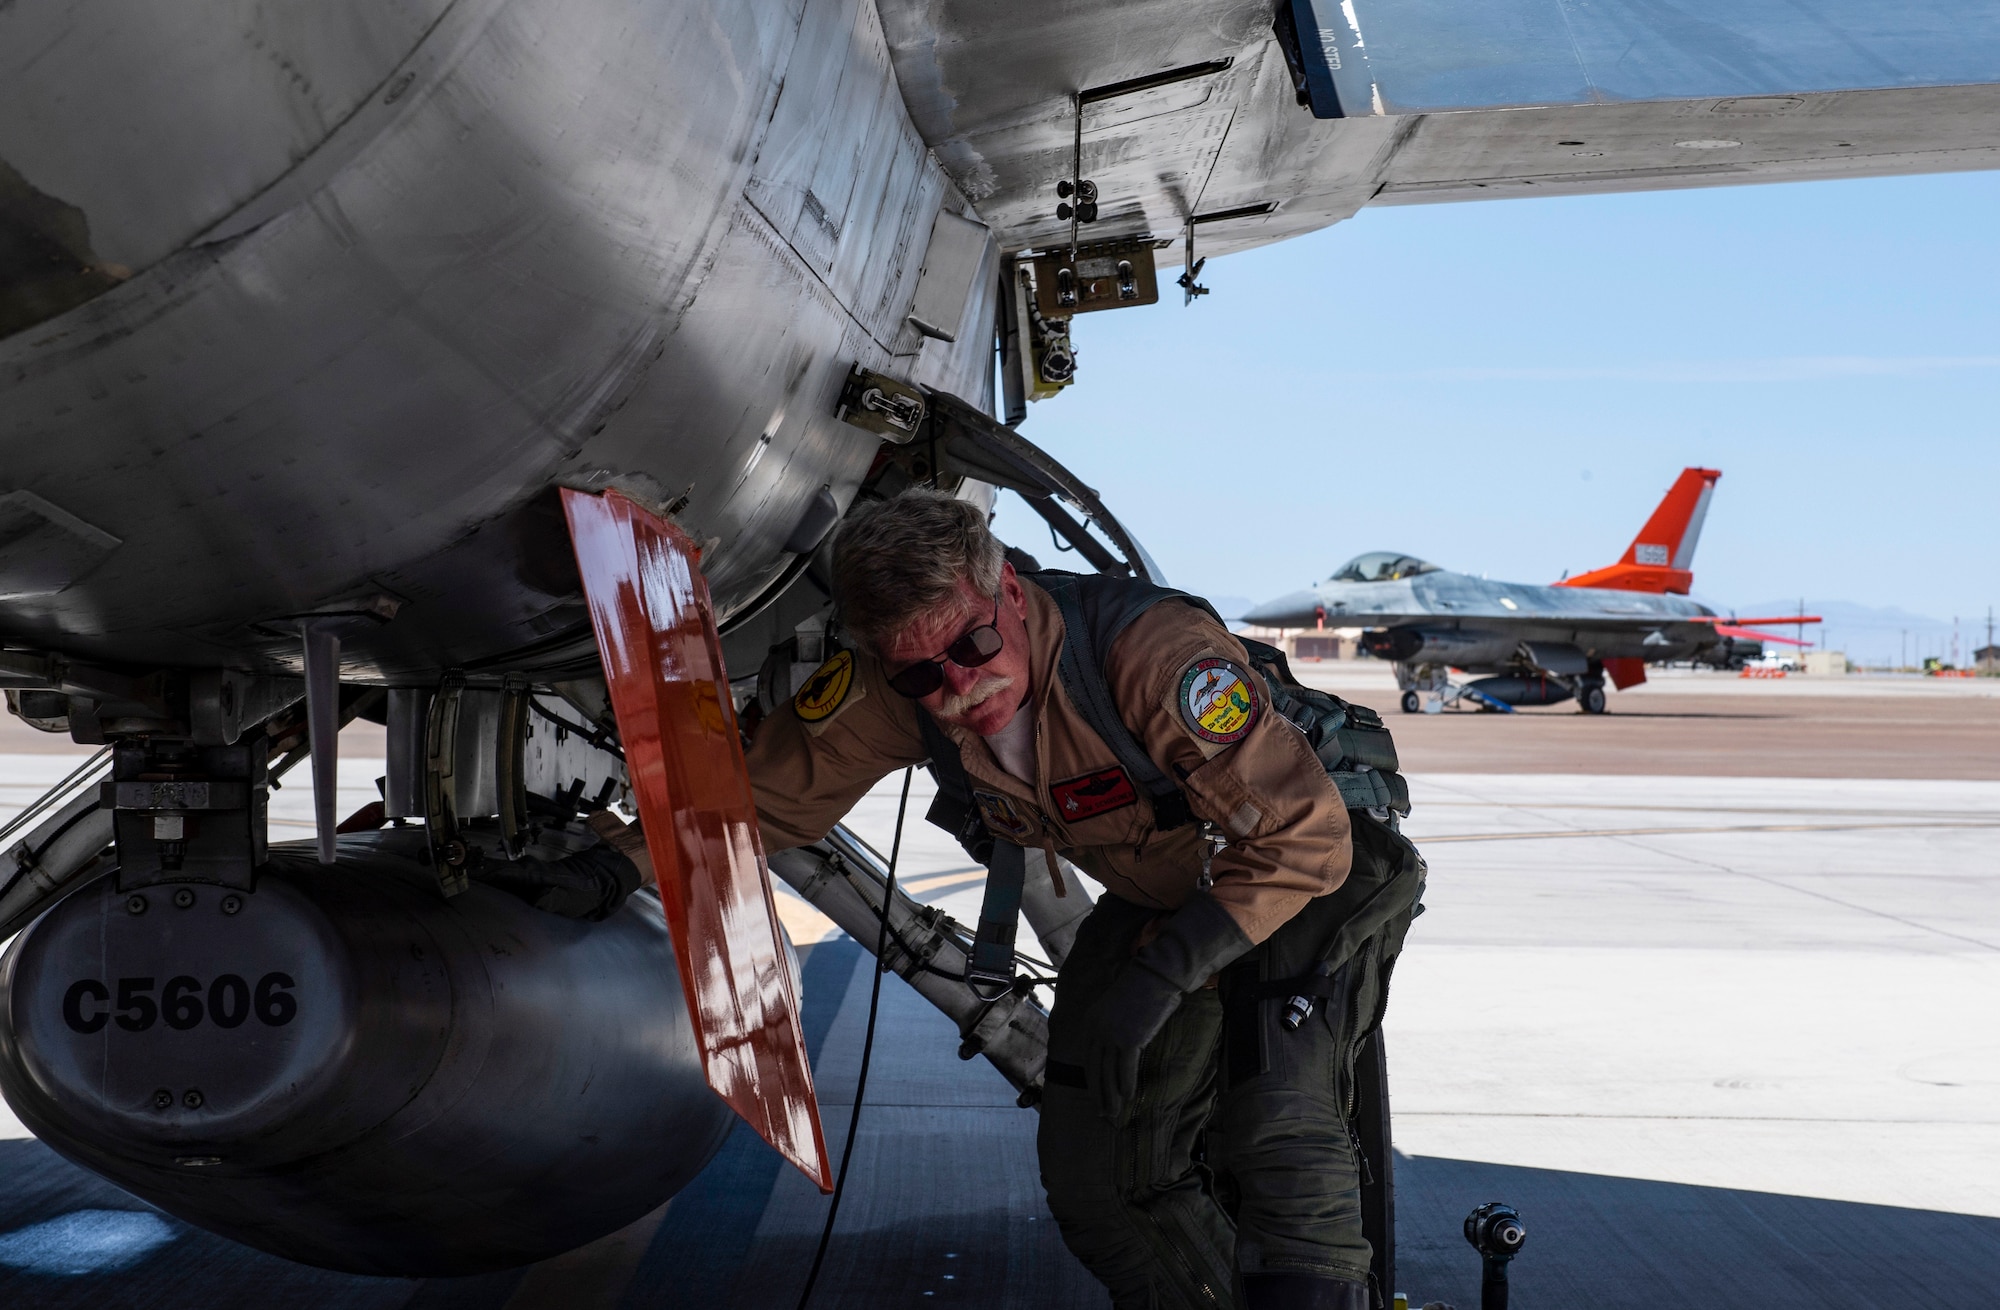 Jim Schreiner, Civilian QF-16 pilot/controller, preflights a QF-16 before a manned dress rehearsal of a missile test on a QF-16 at Holloman Air Force Base, New Mexico. (U.S. Air Force photo by Tech. Sgt. Perry Aston)